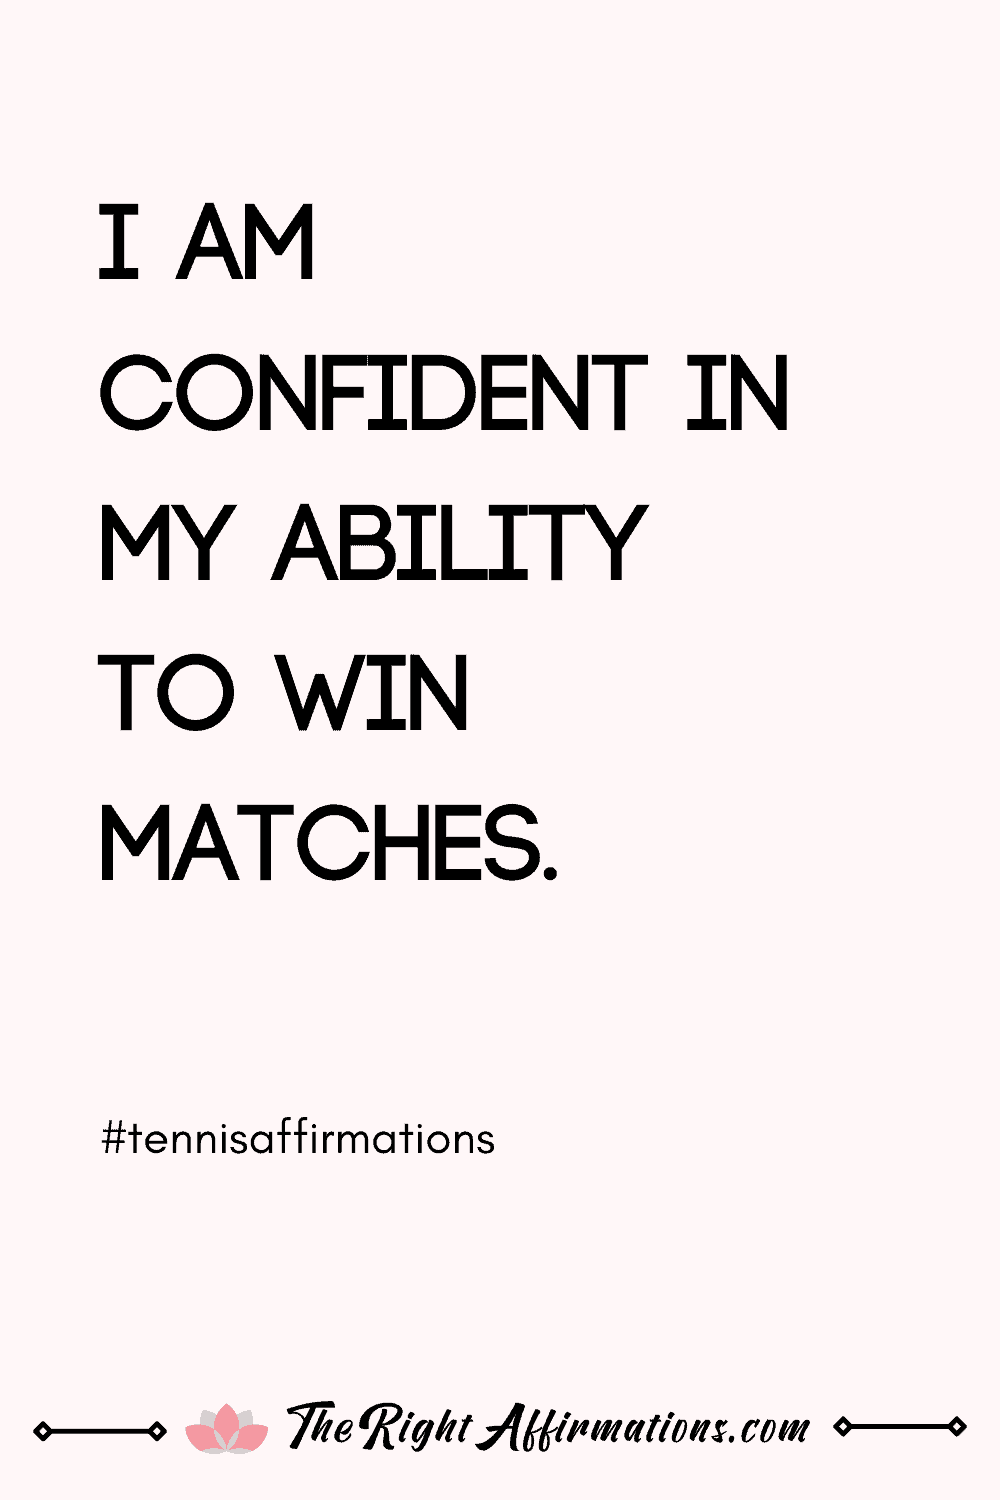 tennis affirmations to improve your mental game